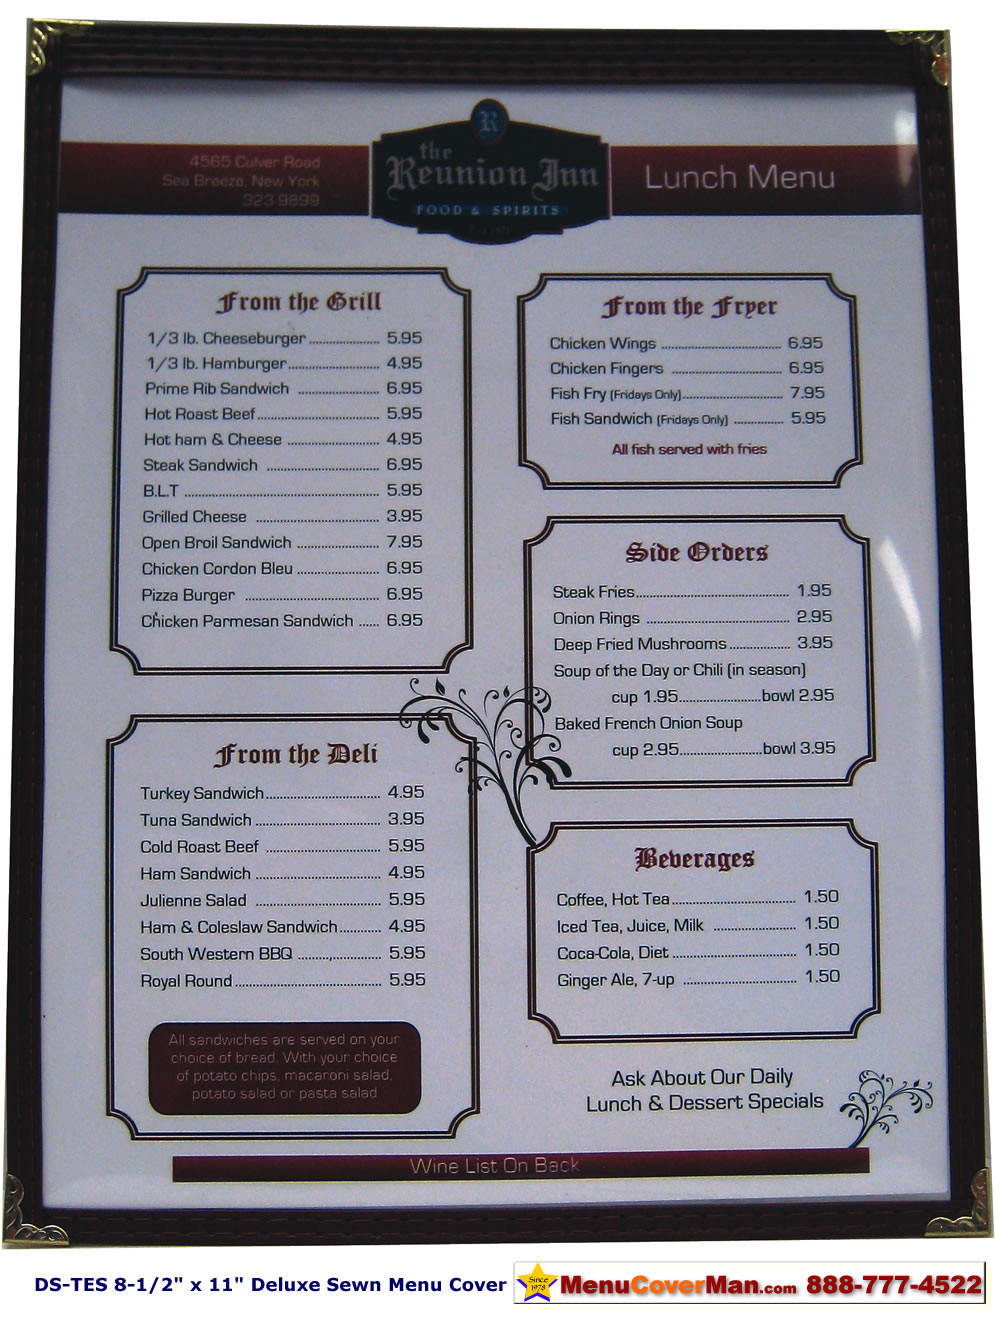 Double stitched cafe menu covers.